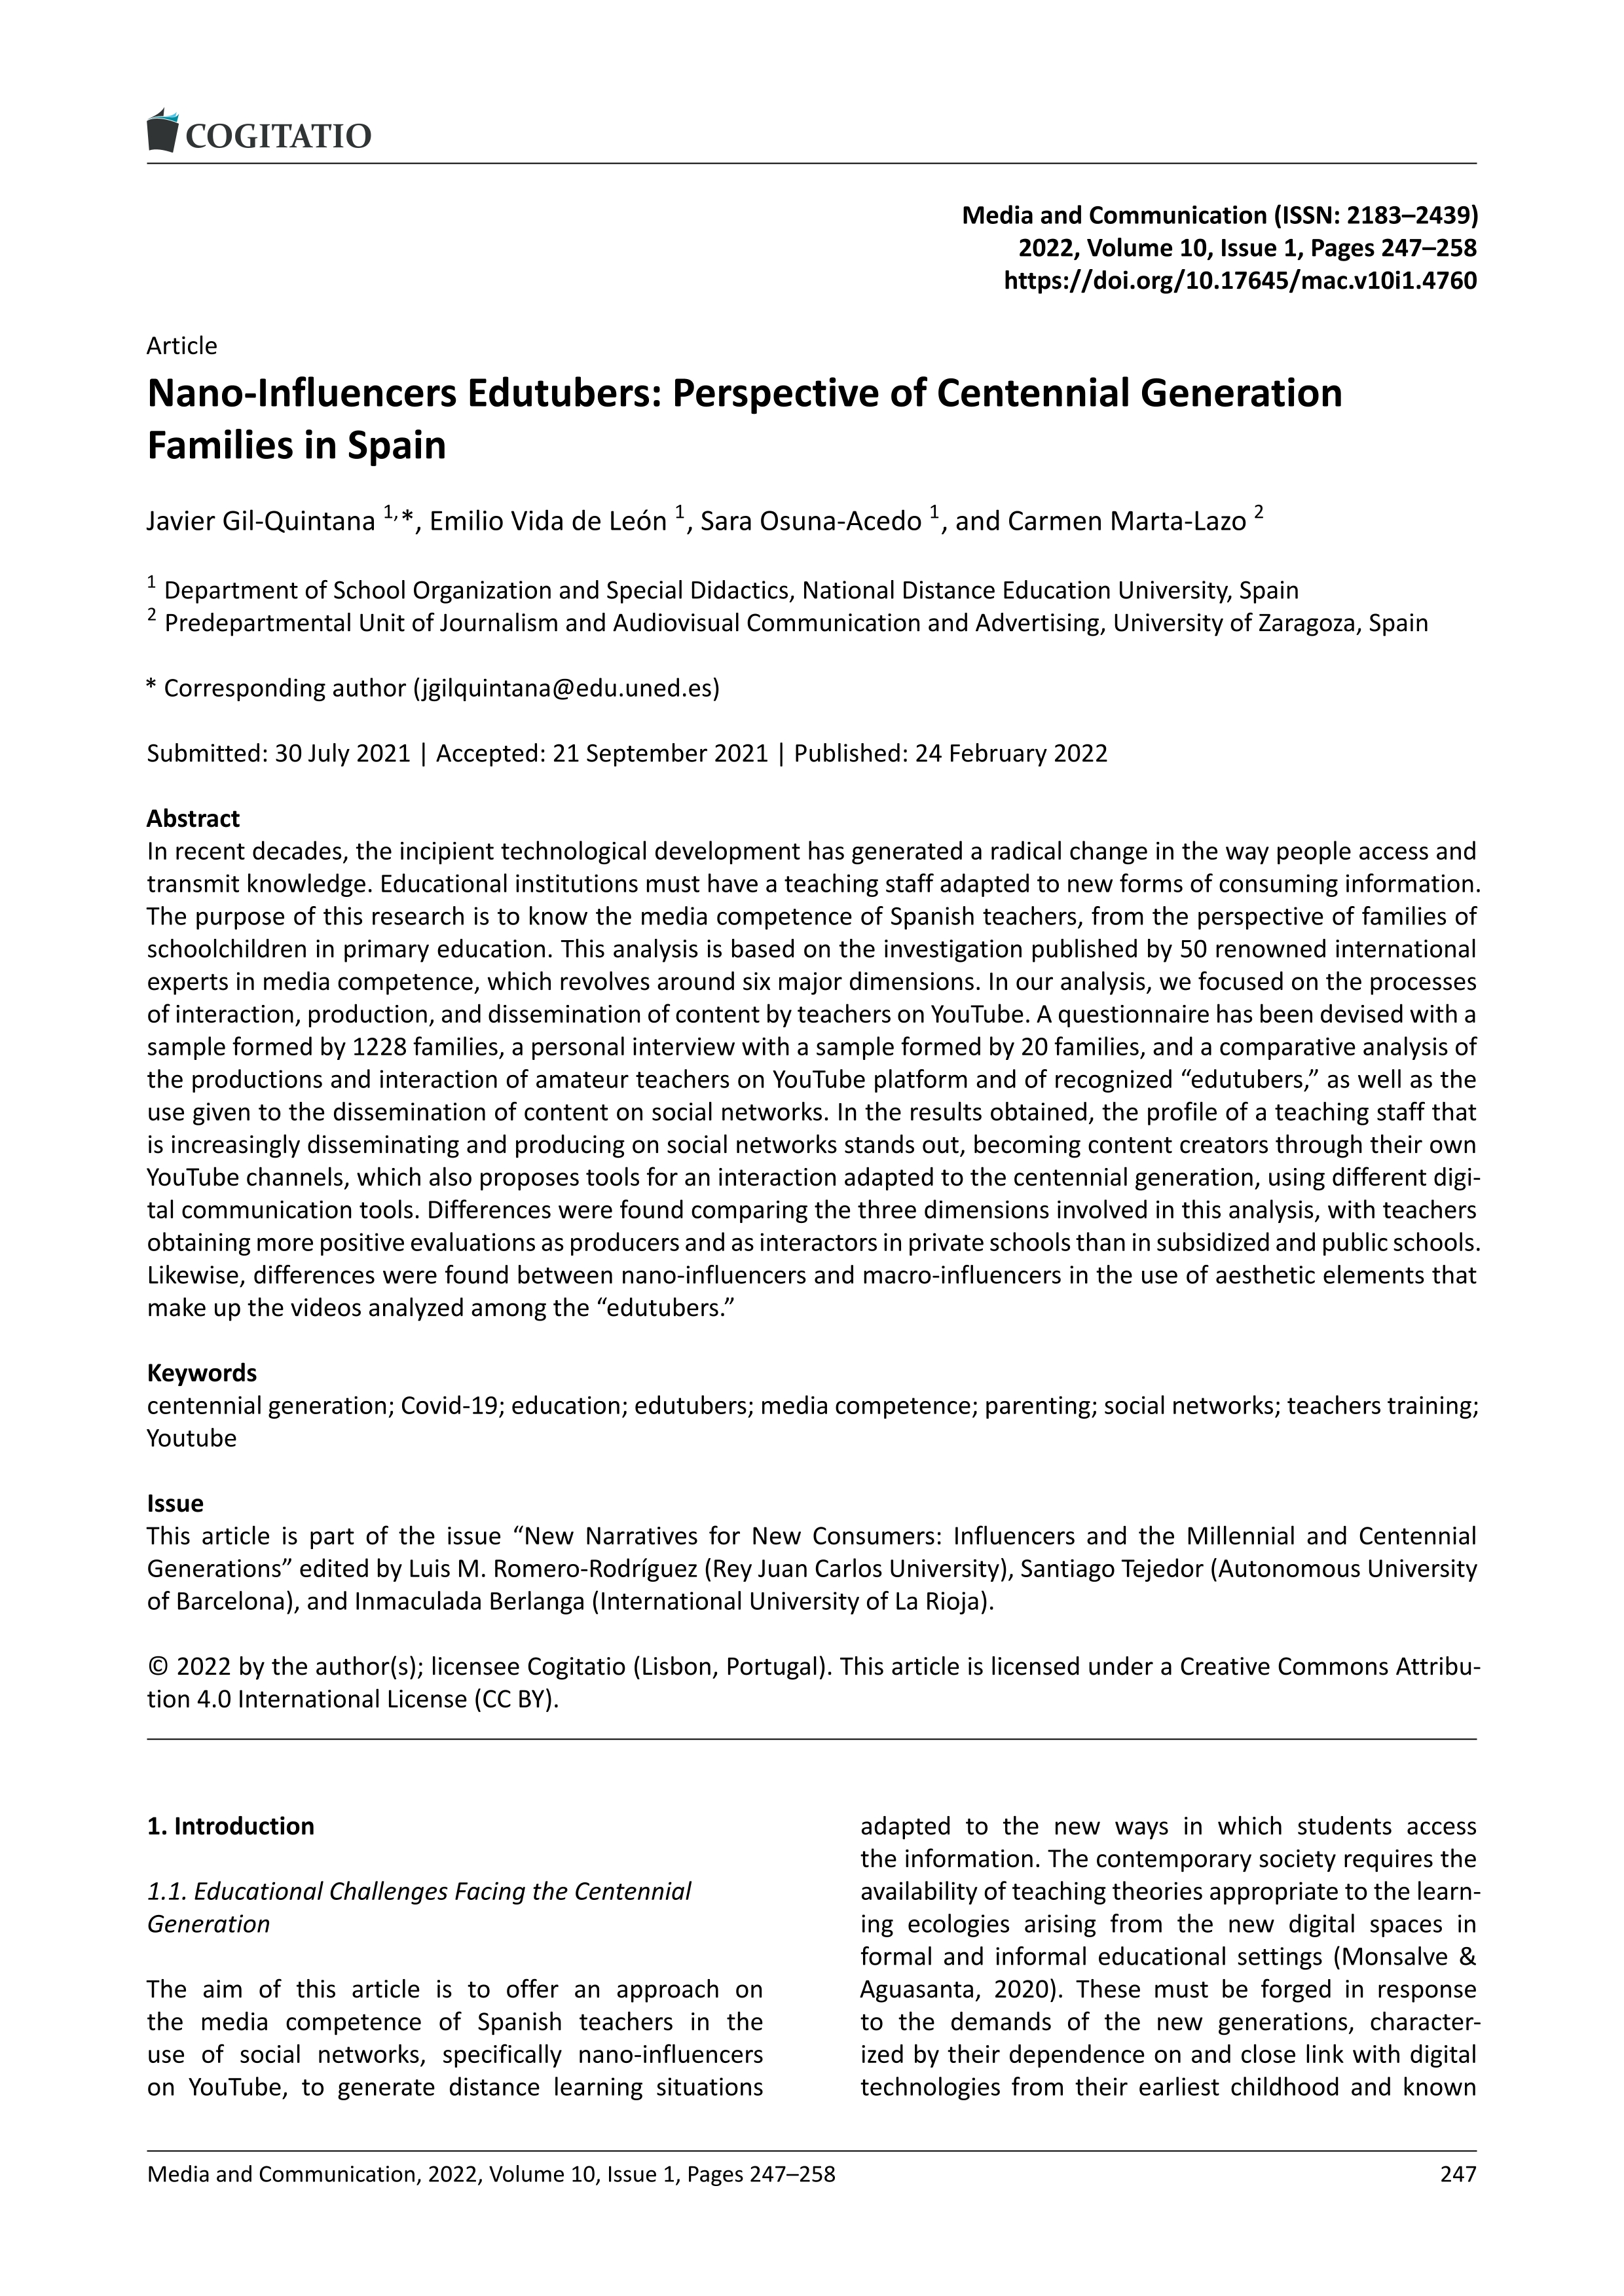 Nano-influencers edutubers: perspective of centennial generation families in spain